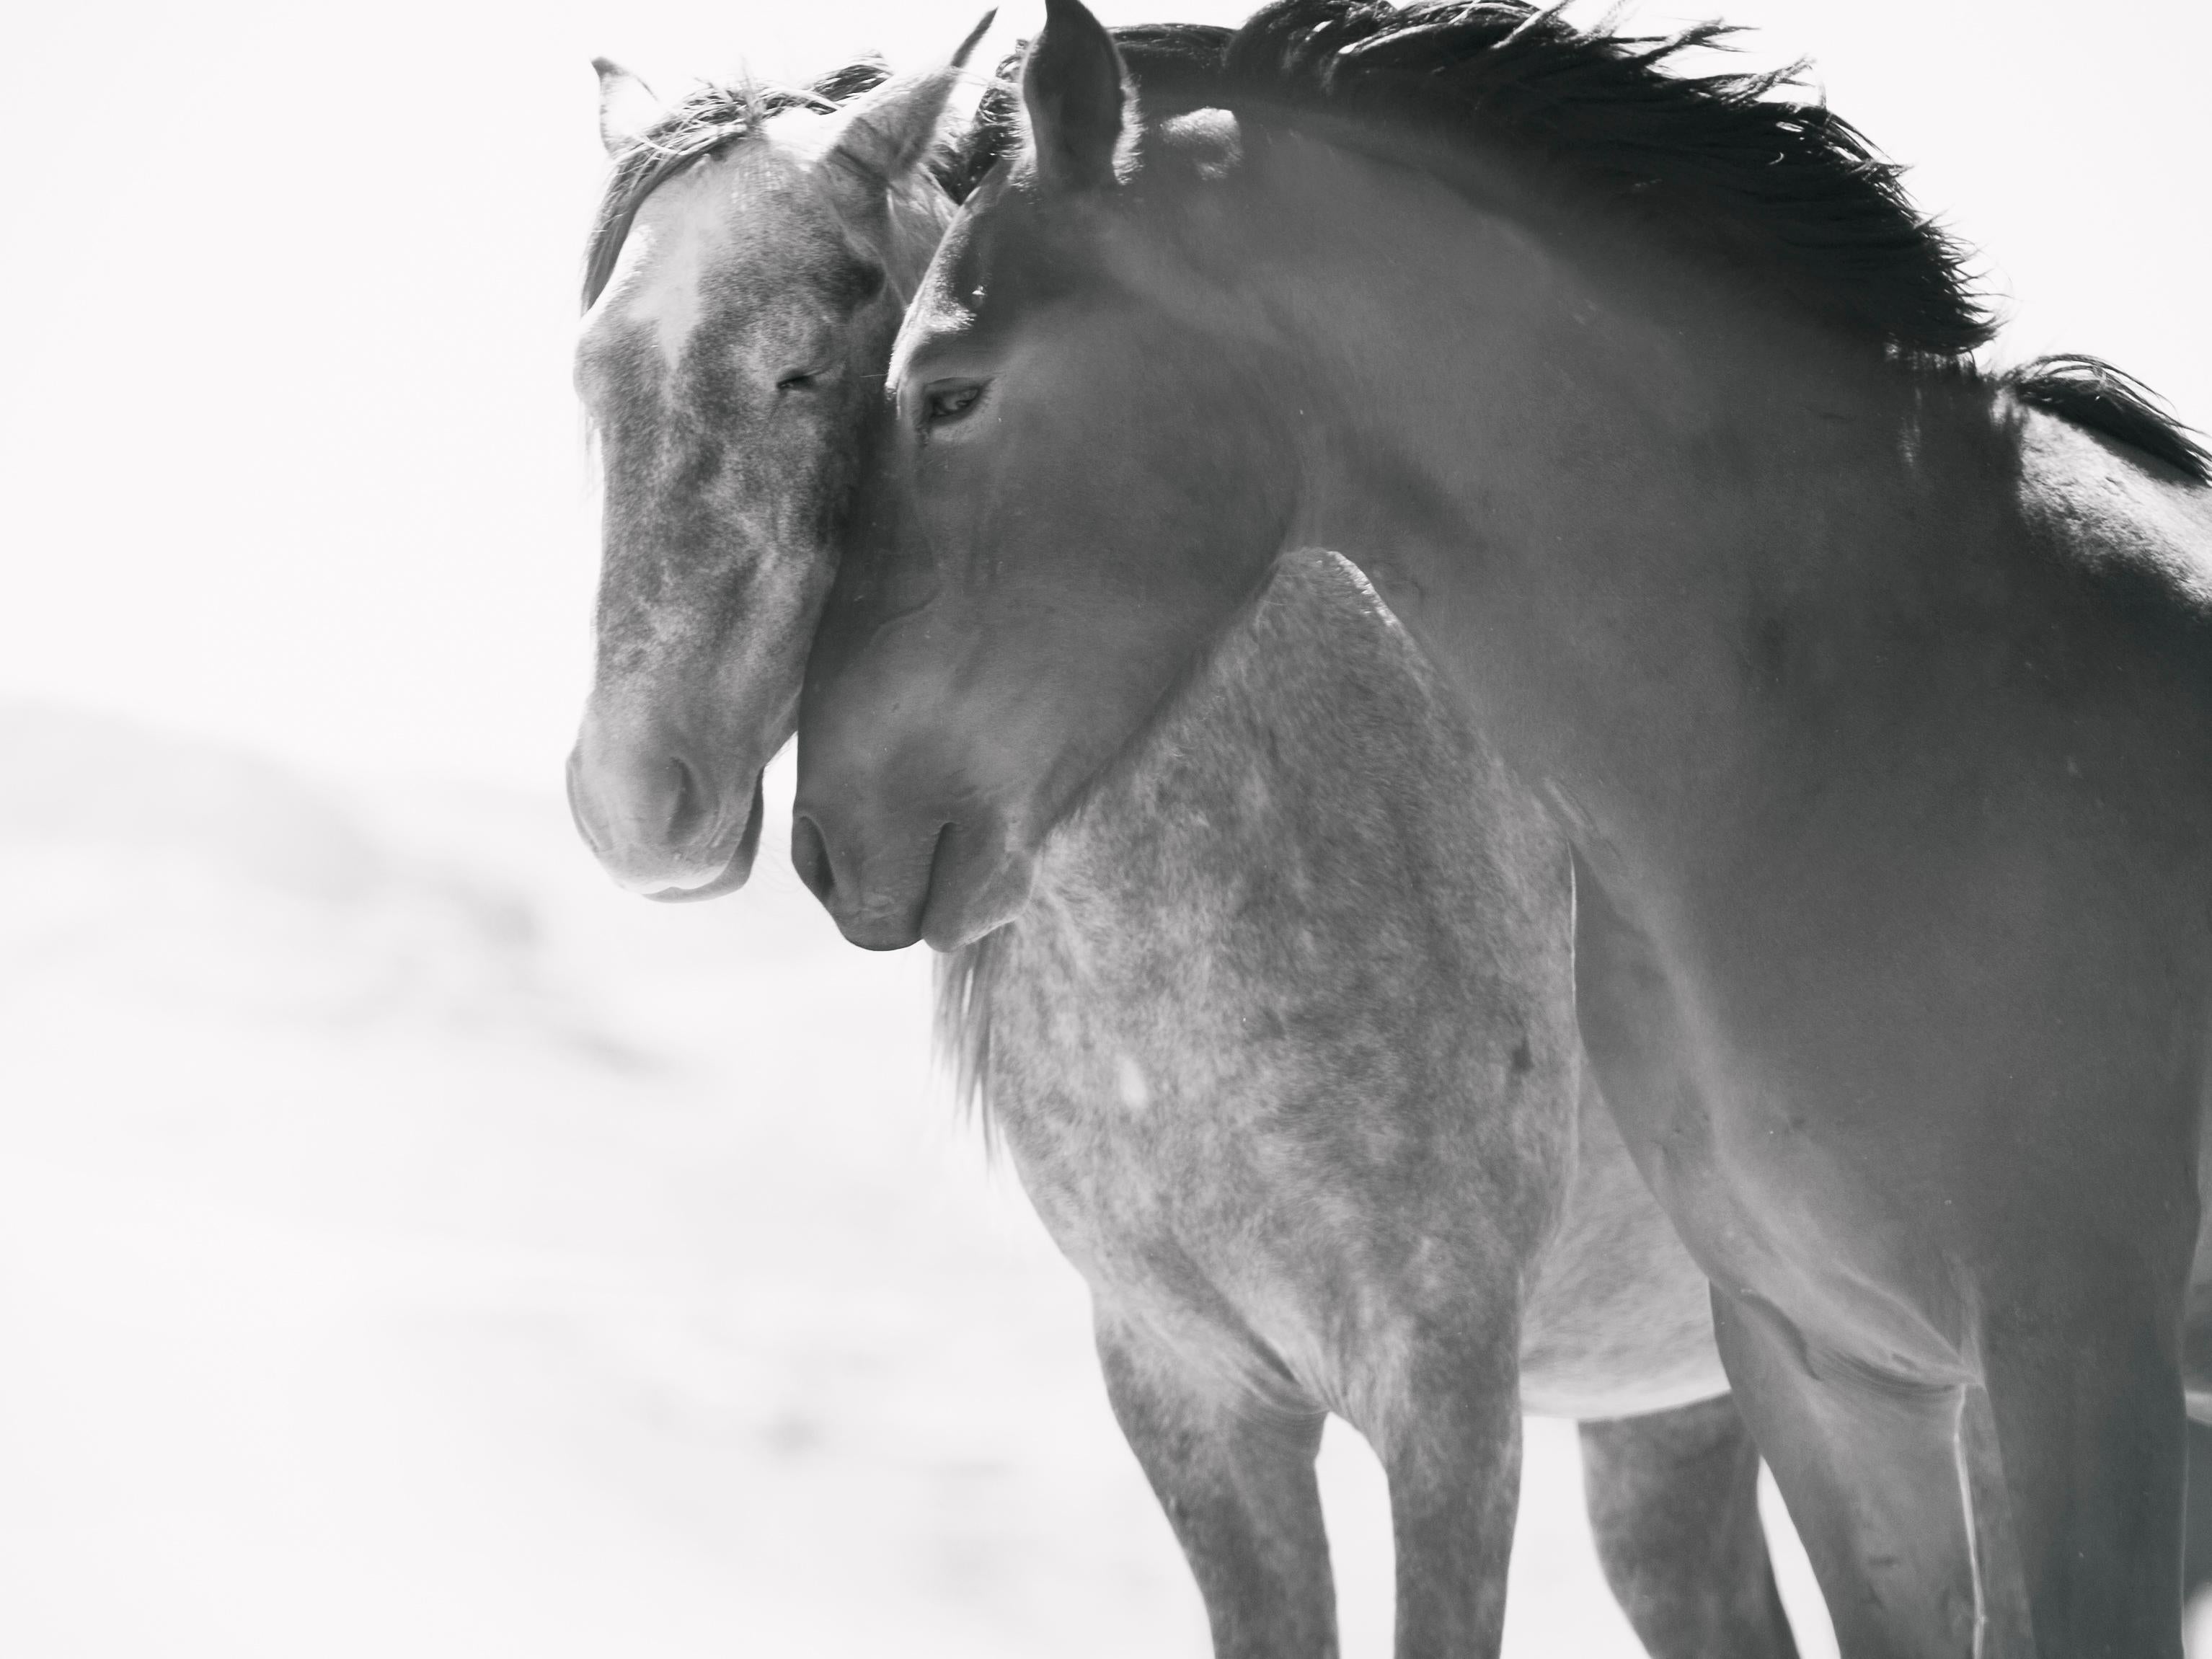 Shane Russeck Animal Print -  Black and White Photography of Wild Horses Mustang Photograph 38x48  Unsigned